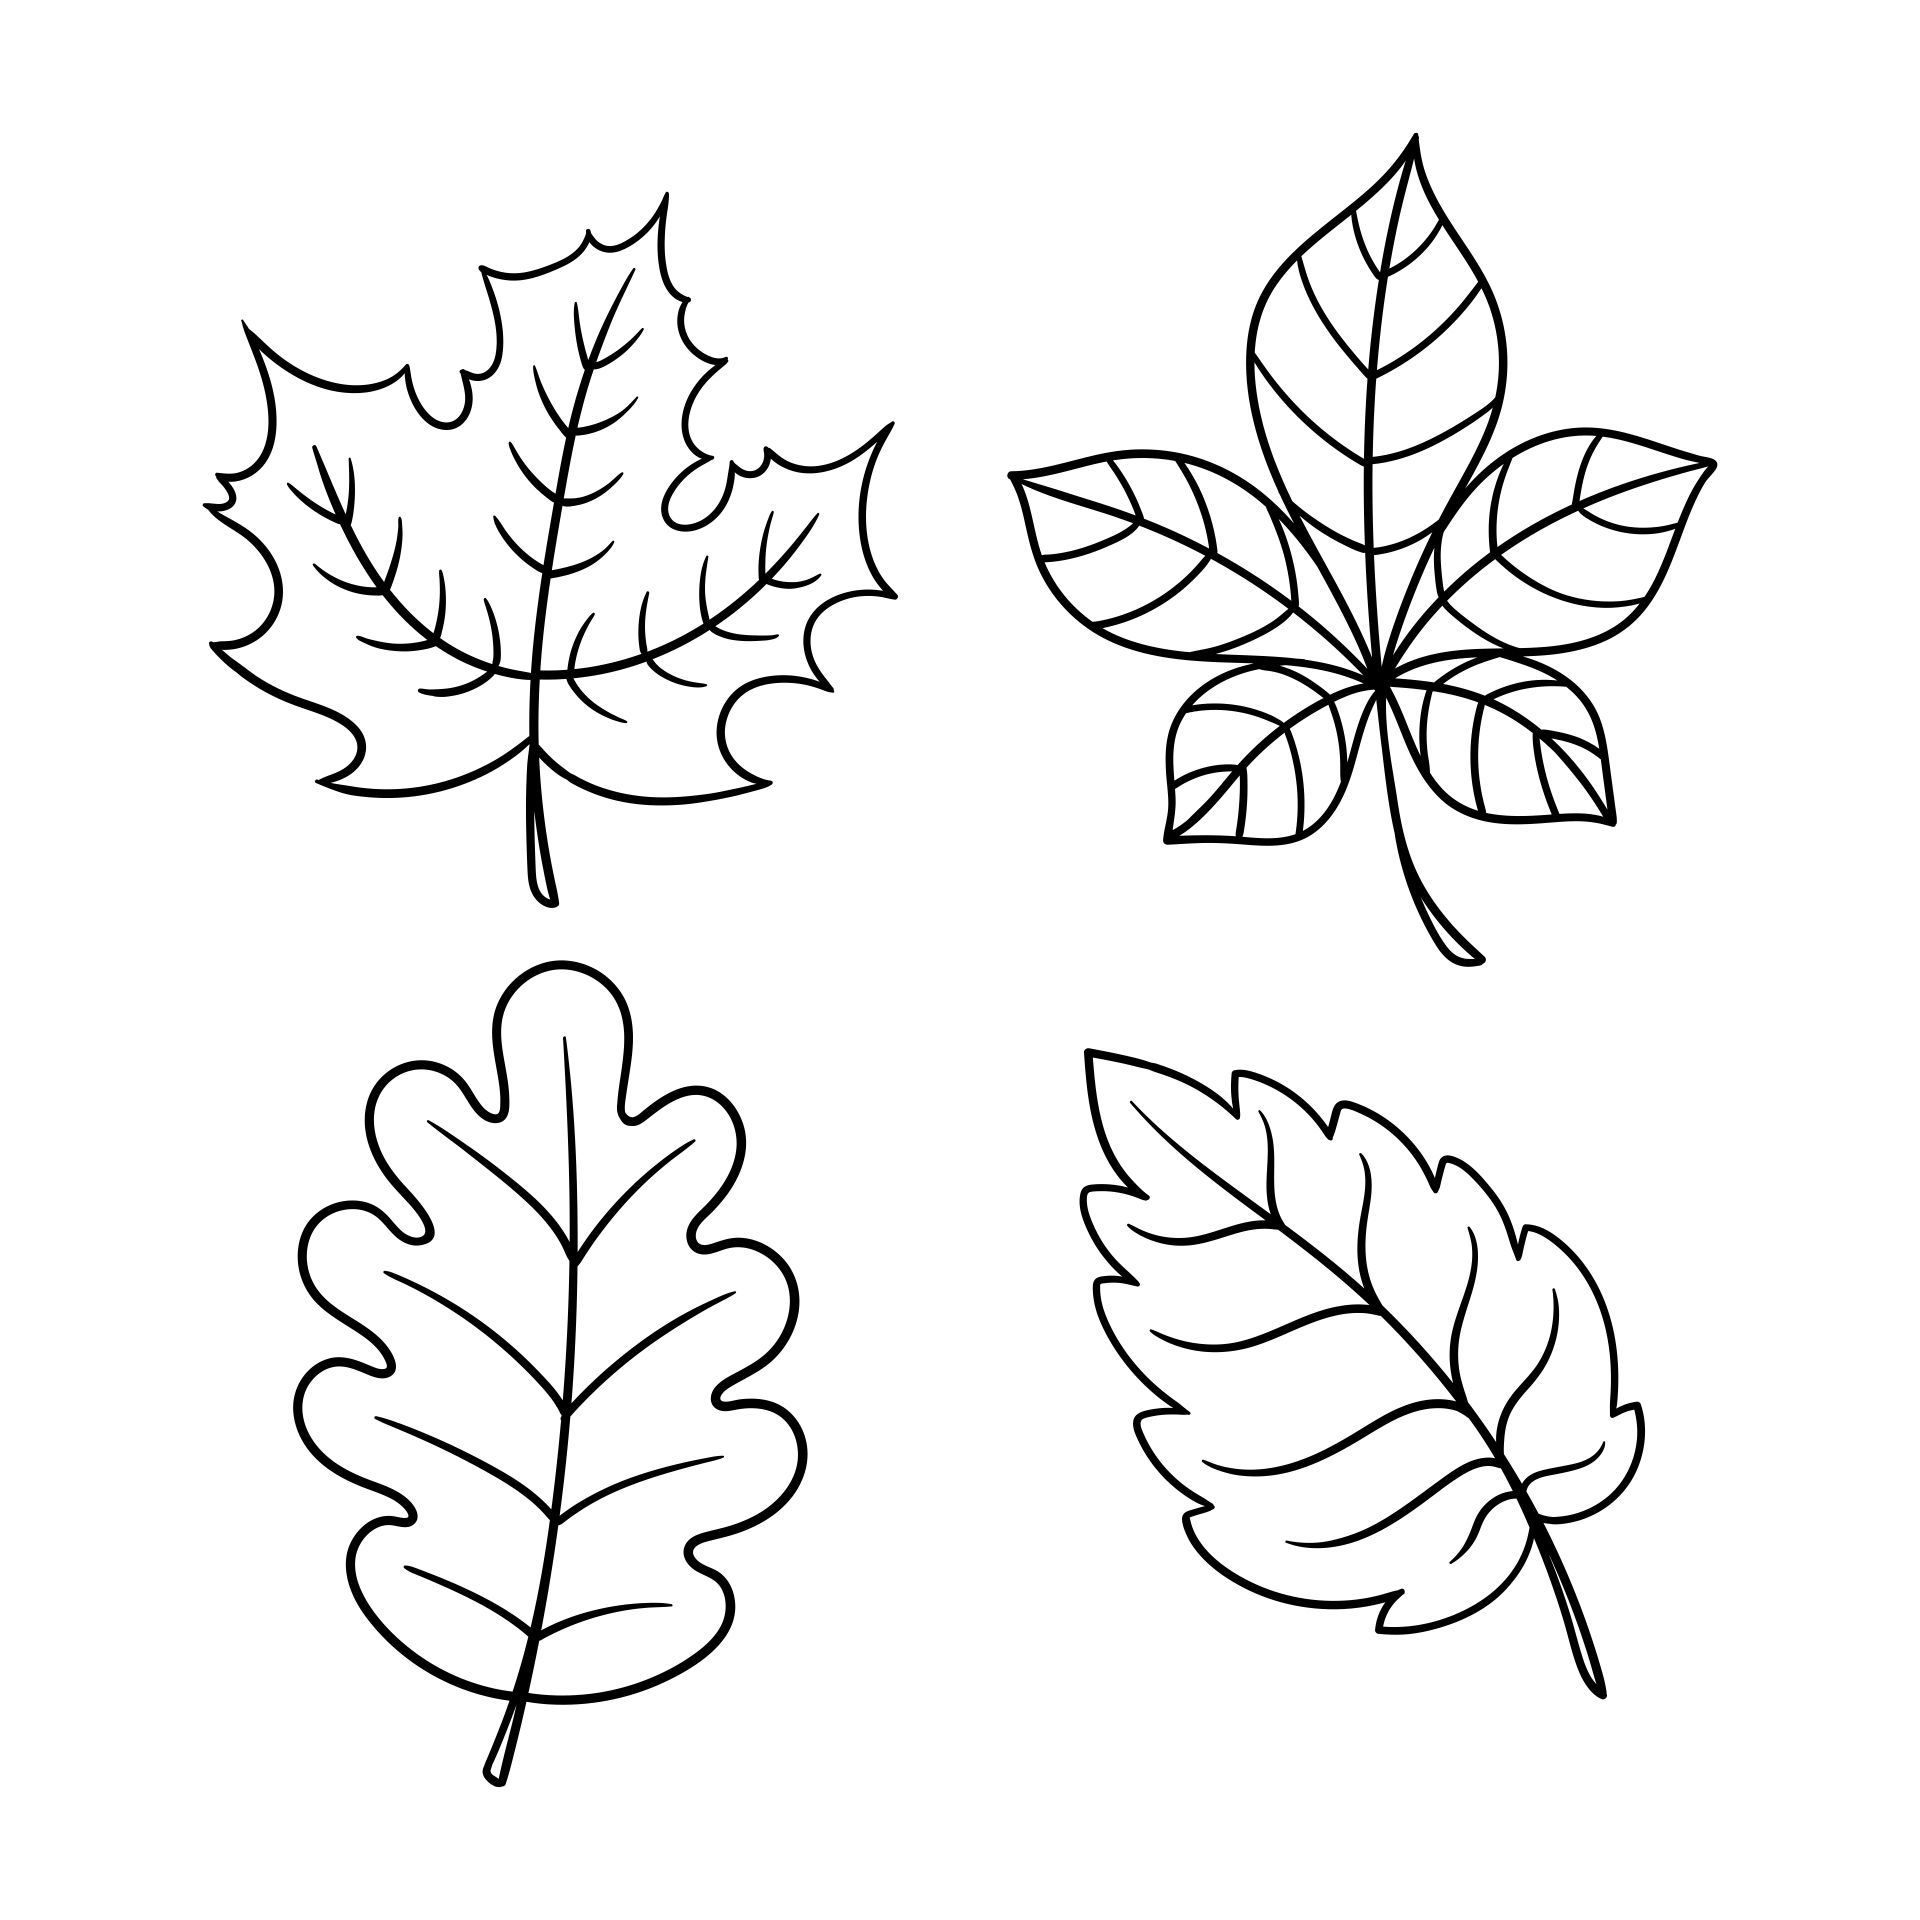 Printable Fall Leaves to Color